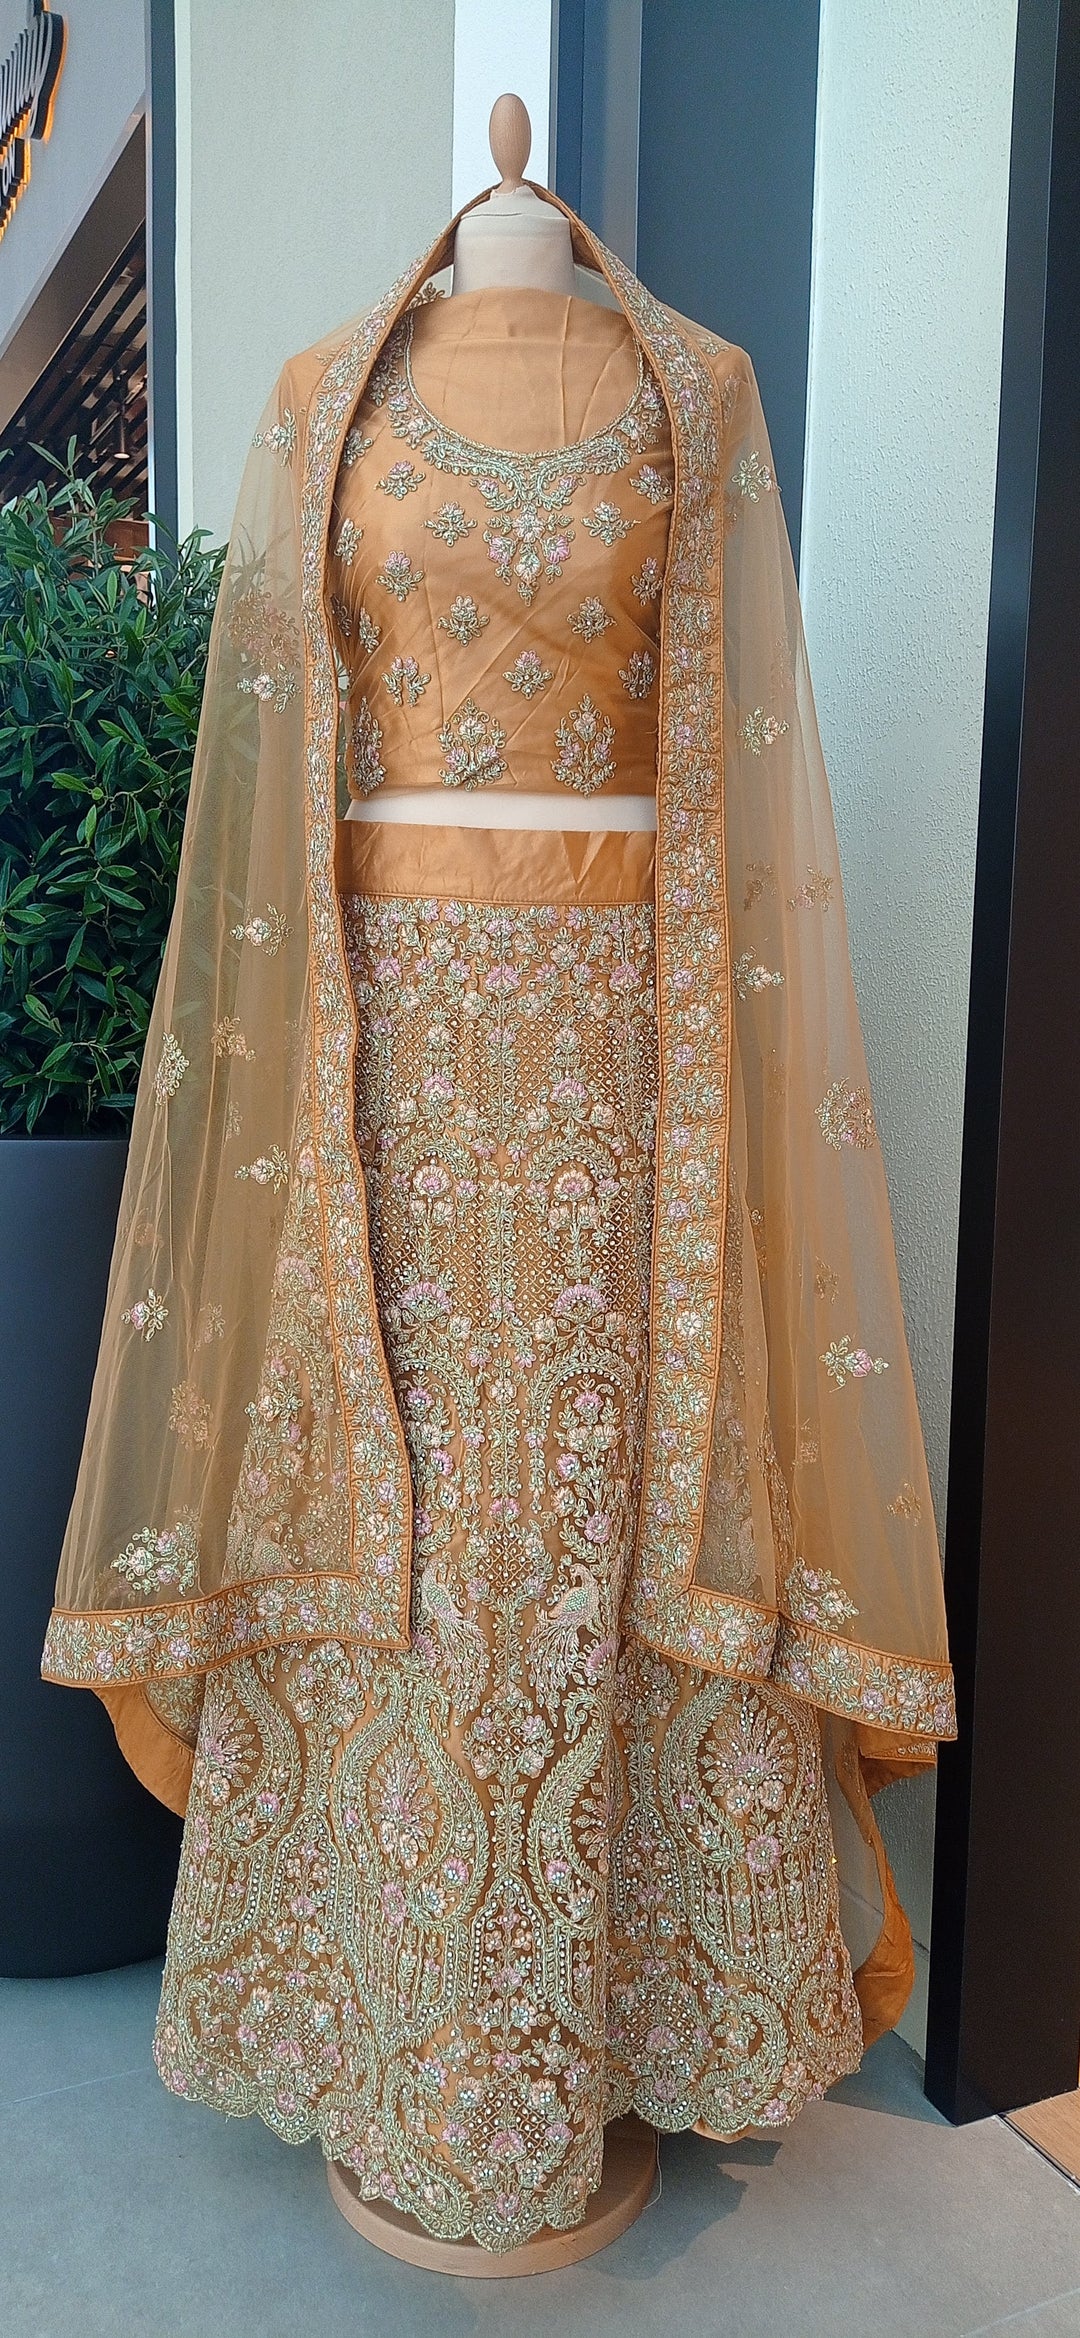 Shagun Metallic Nude Satin Lehenga with Pink and Silver Peacocks (Unstitched)